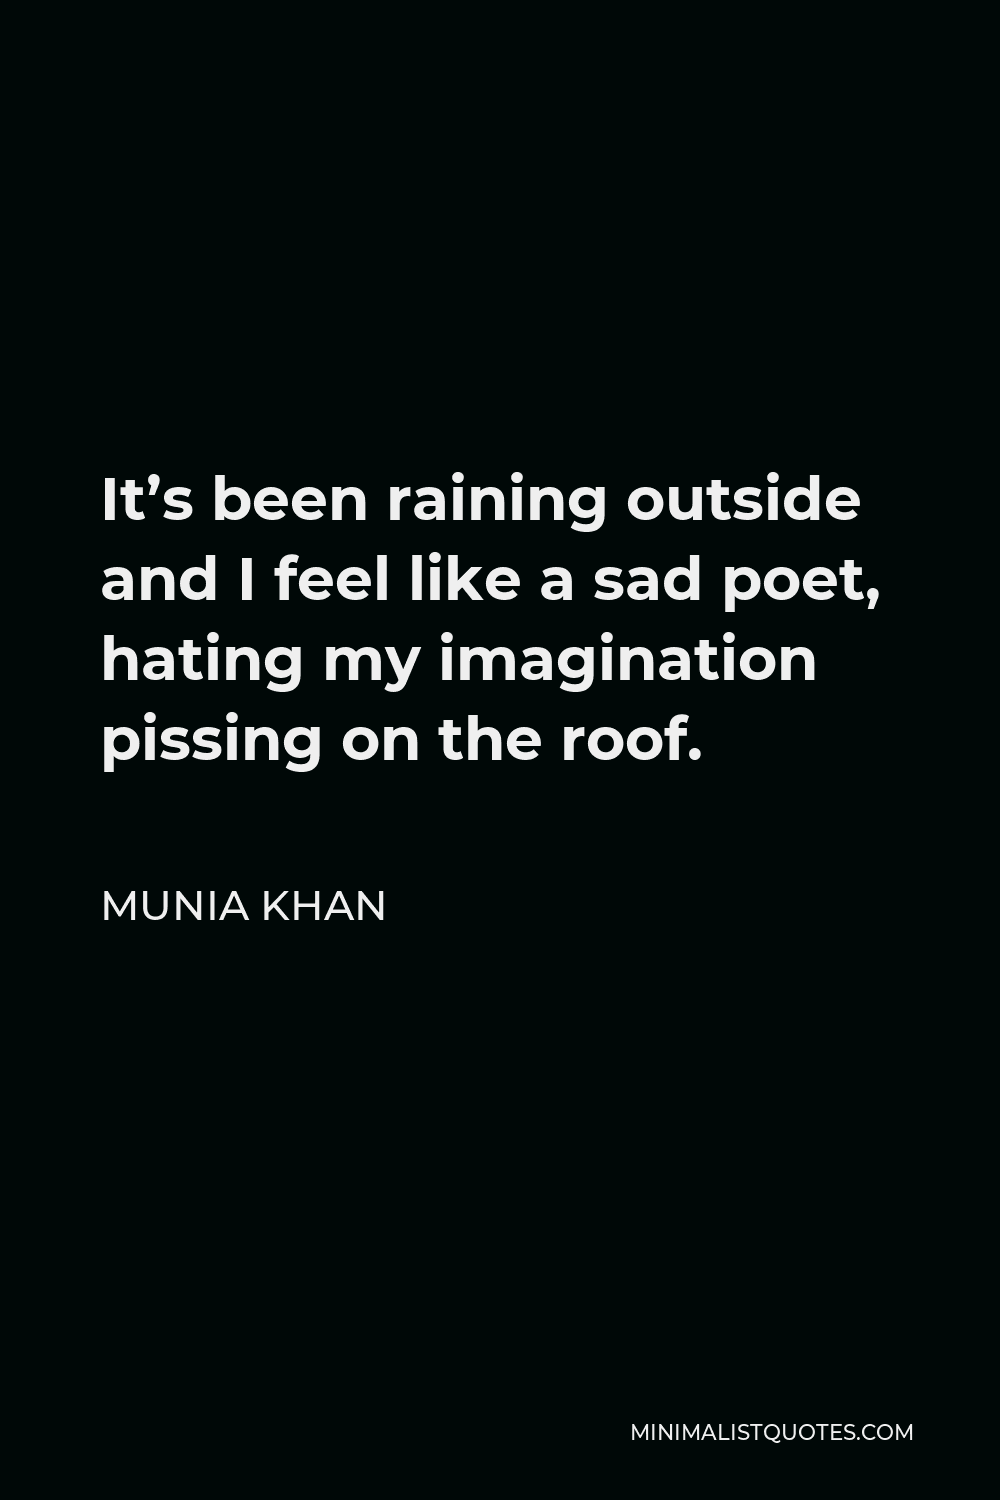 Munia Khan Quote - It’s been raining outside and I feel like a sad poet, hating my imagination pissing on the roof.